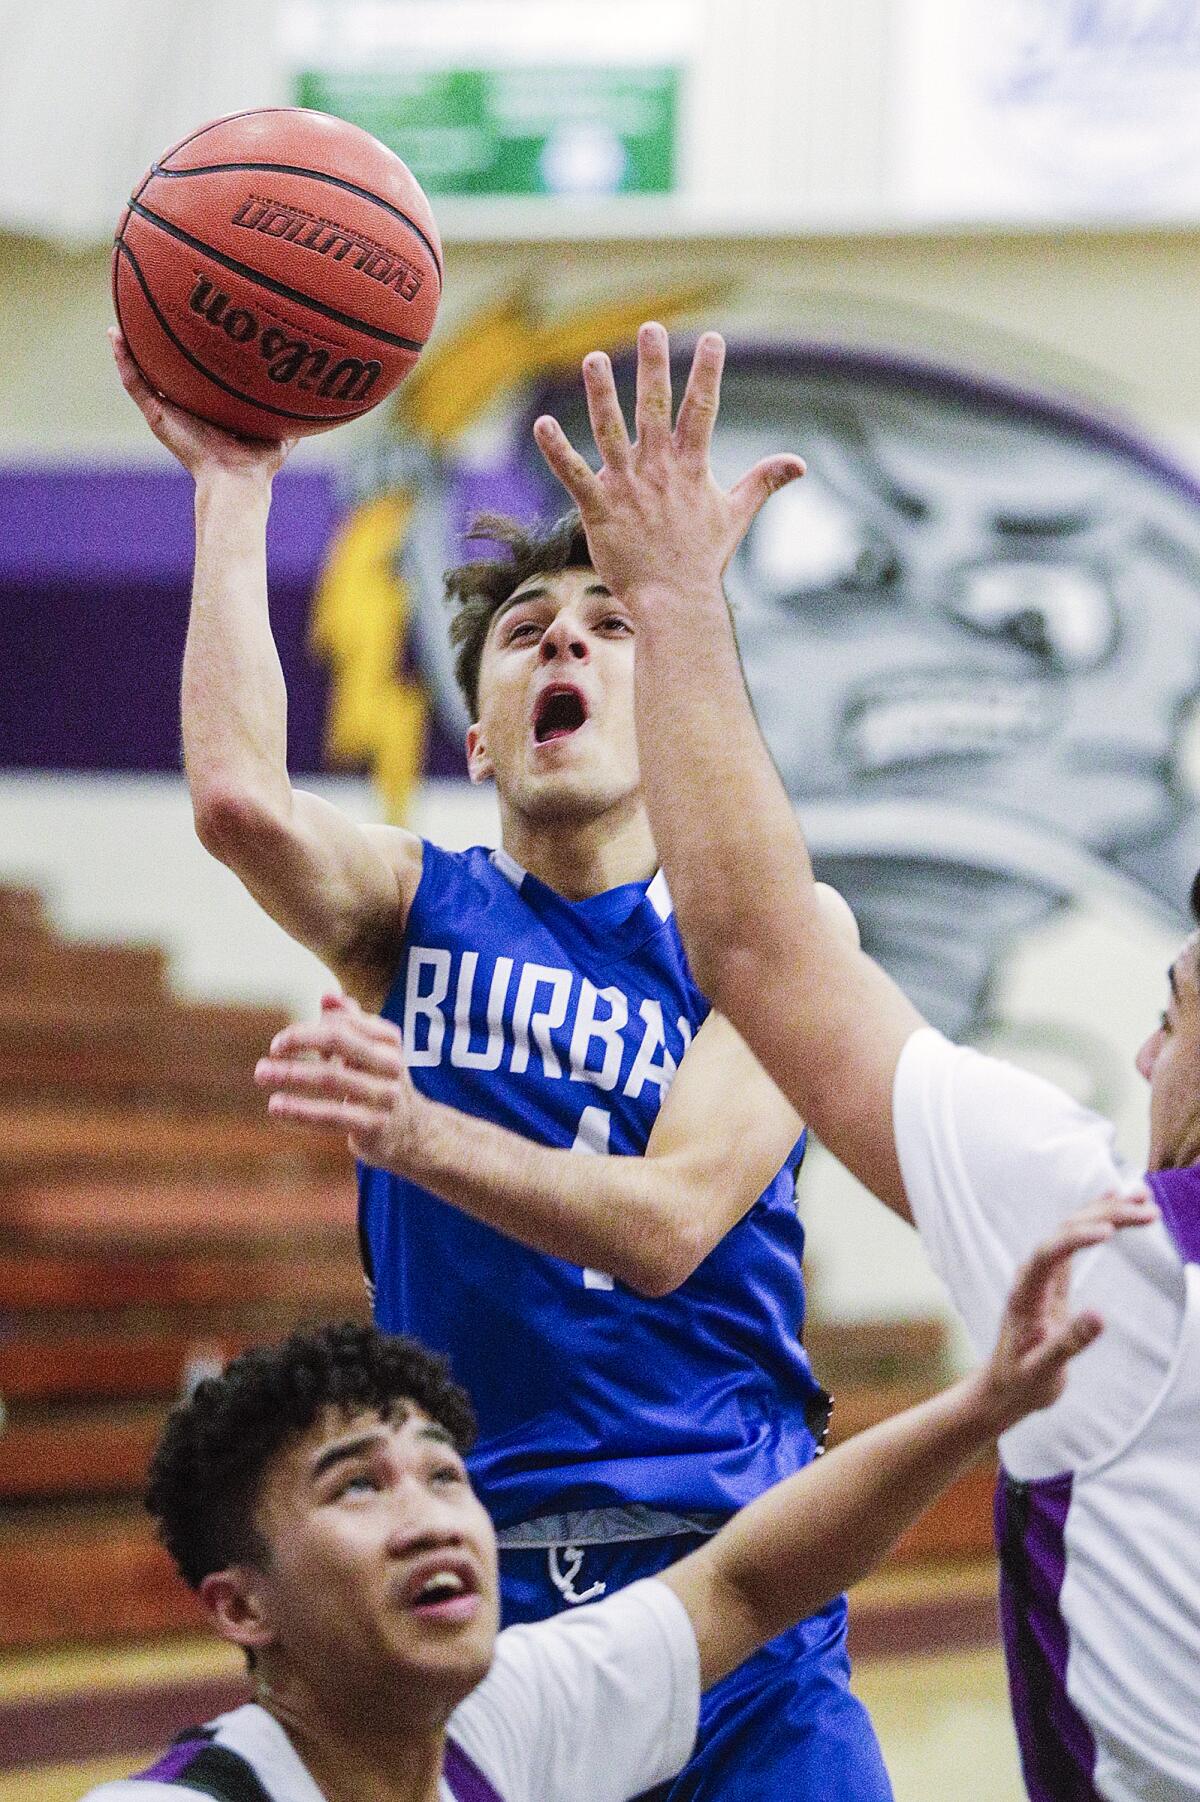 Burbank's Vartan Avetisyan drives to shoot against Hoover in a Pacific League boys' basketball game at Hoover on Friday.